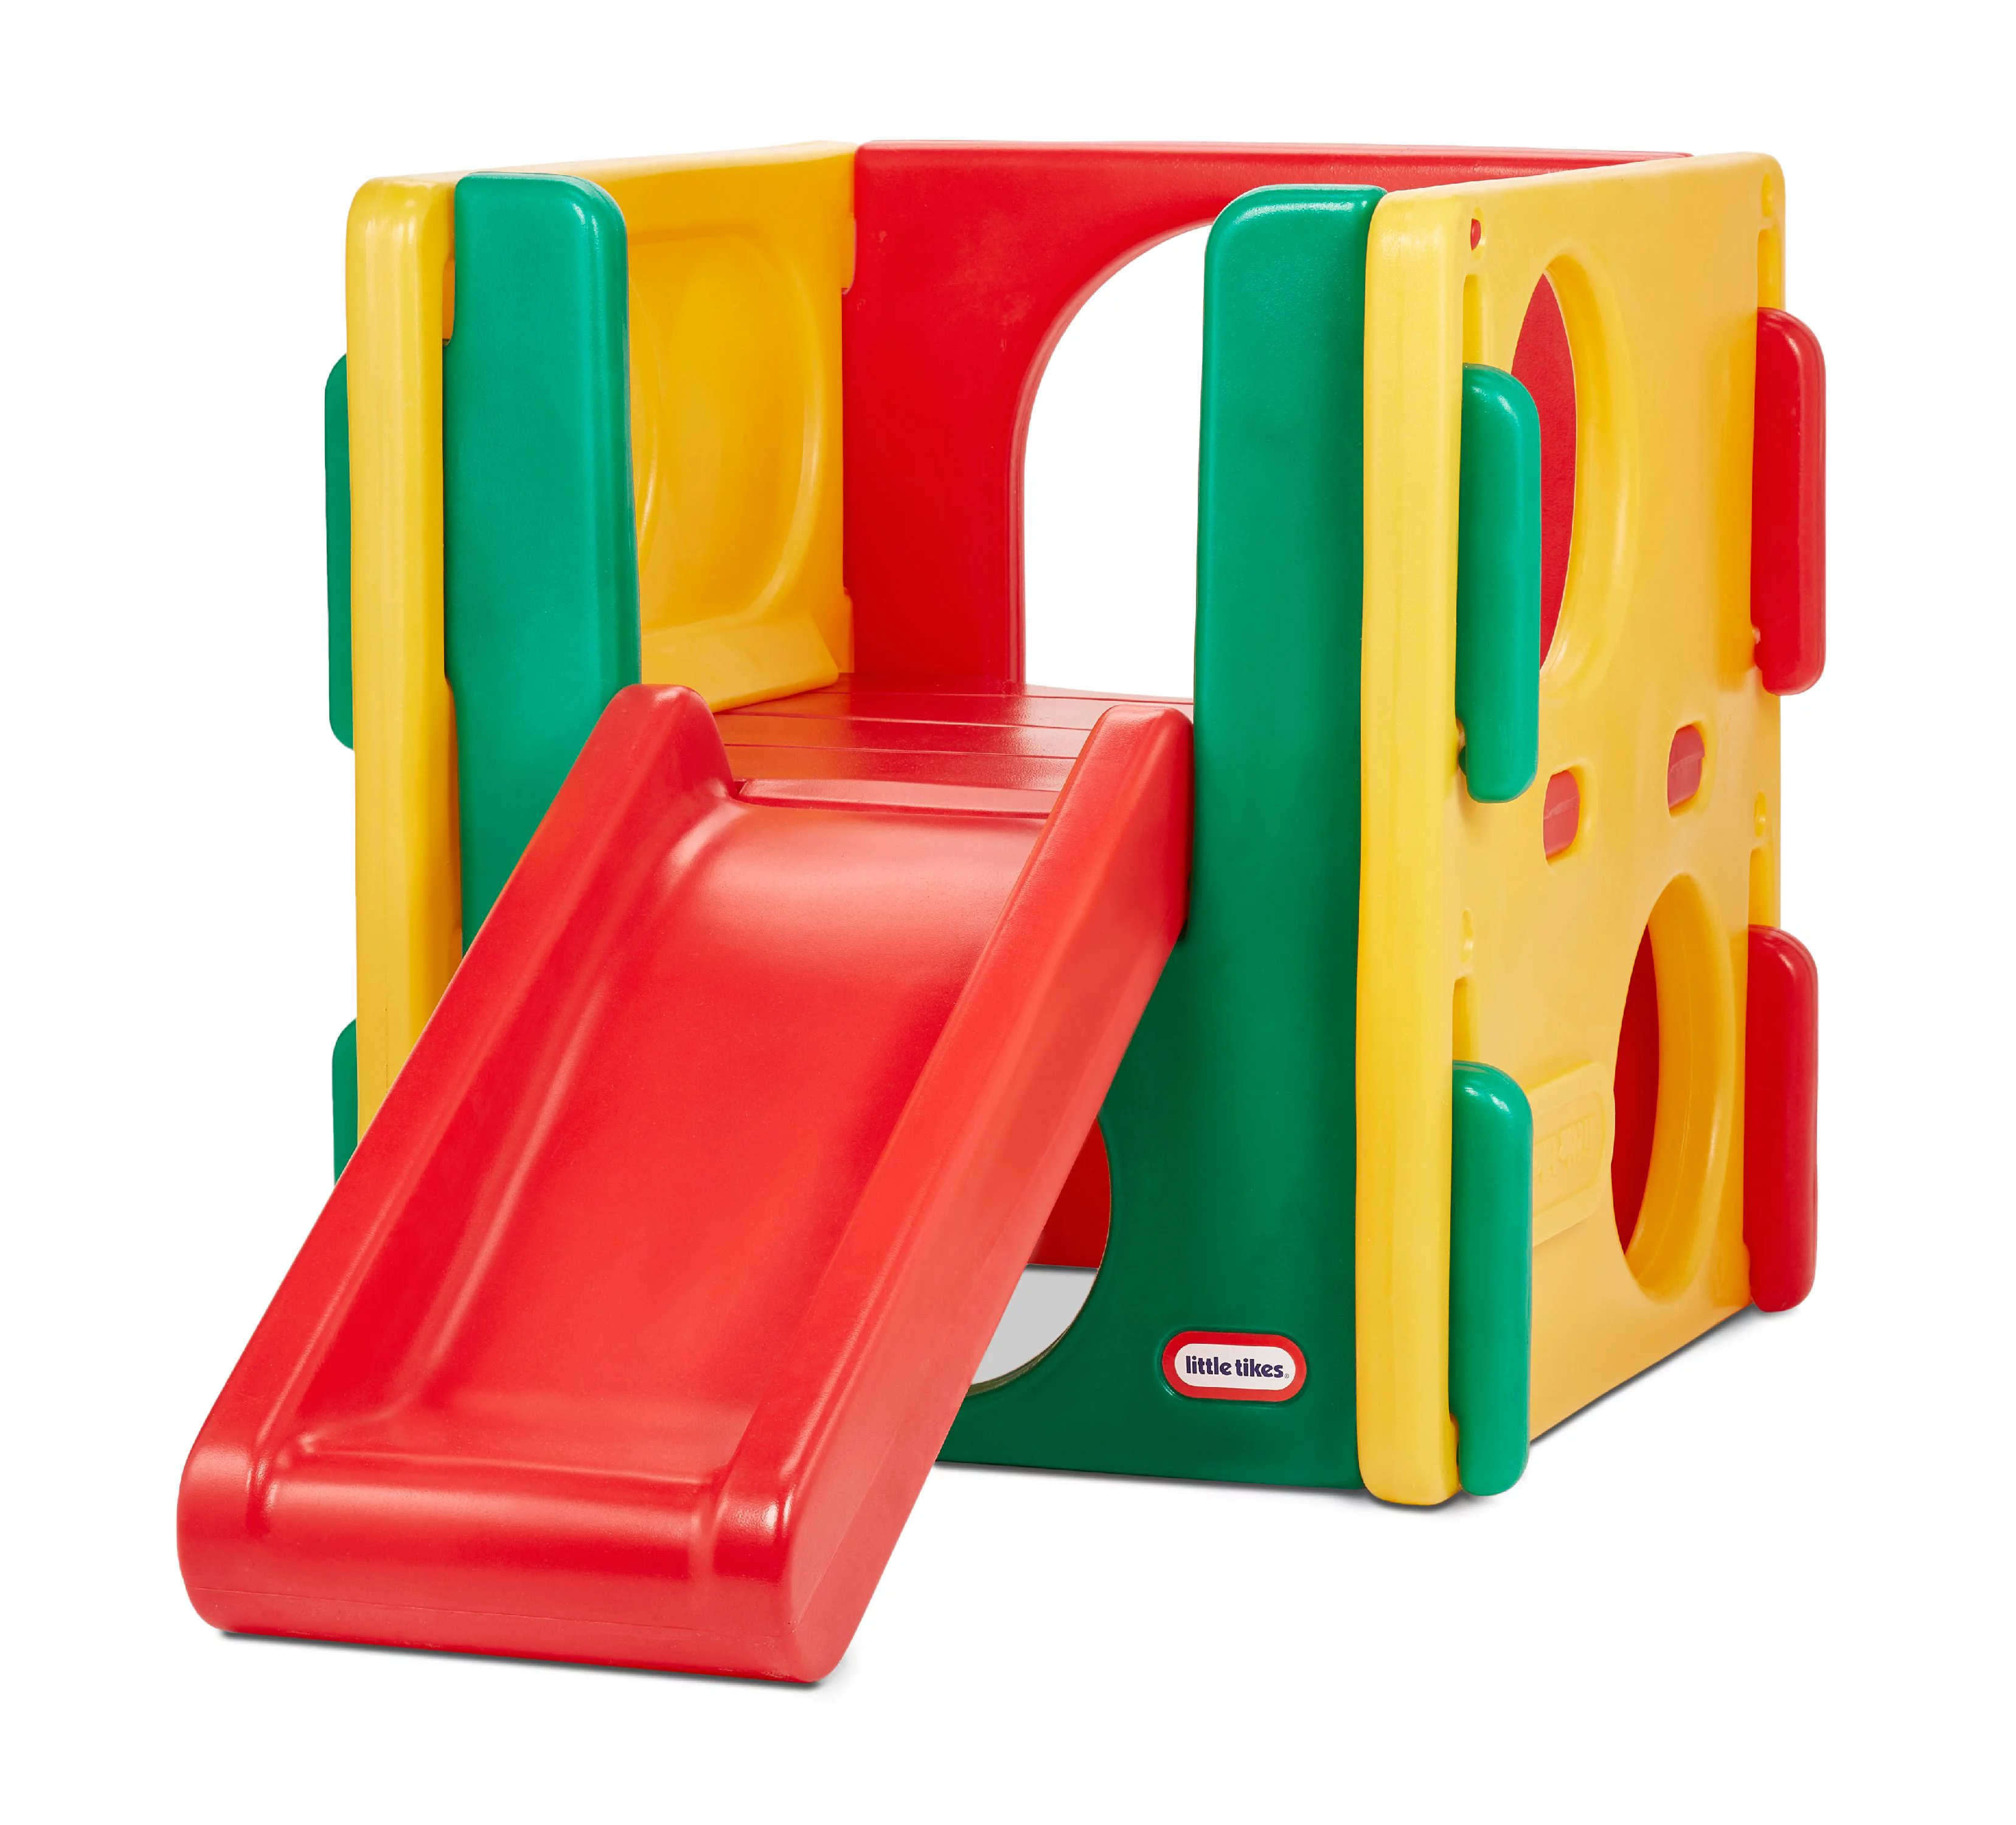 Little Tikes Jr. Activity Gym for Toddlers